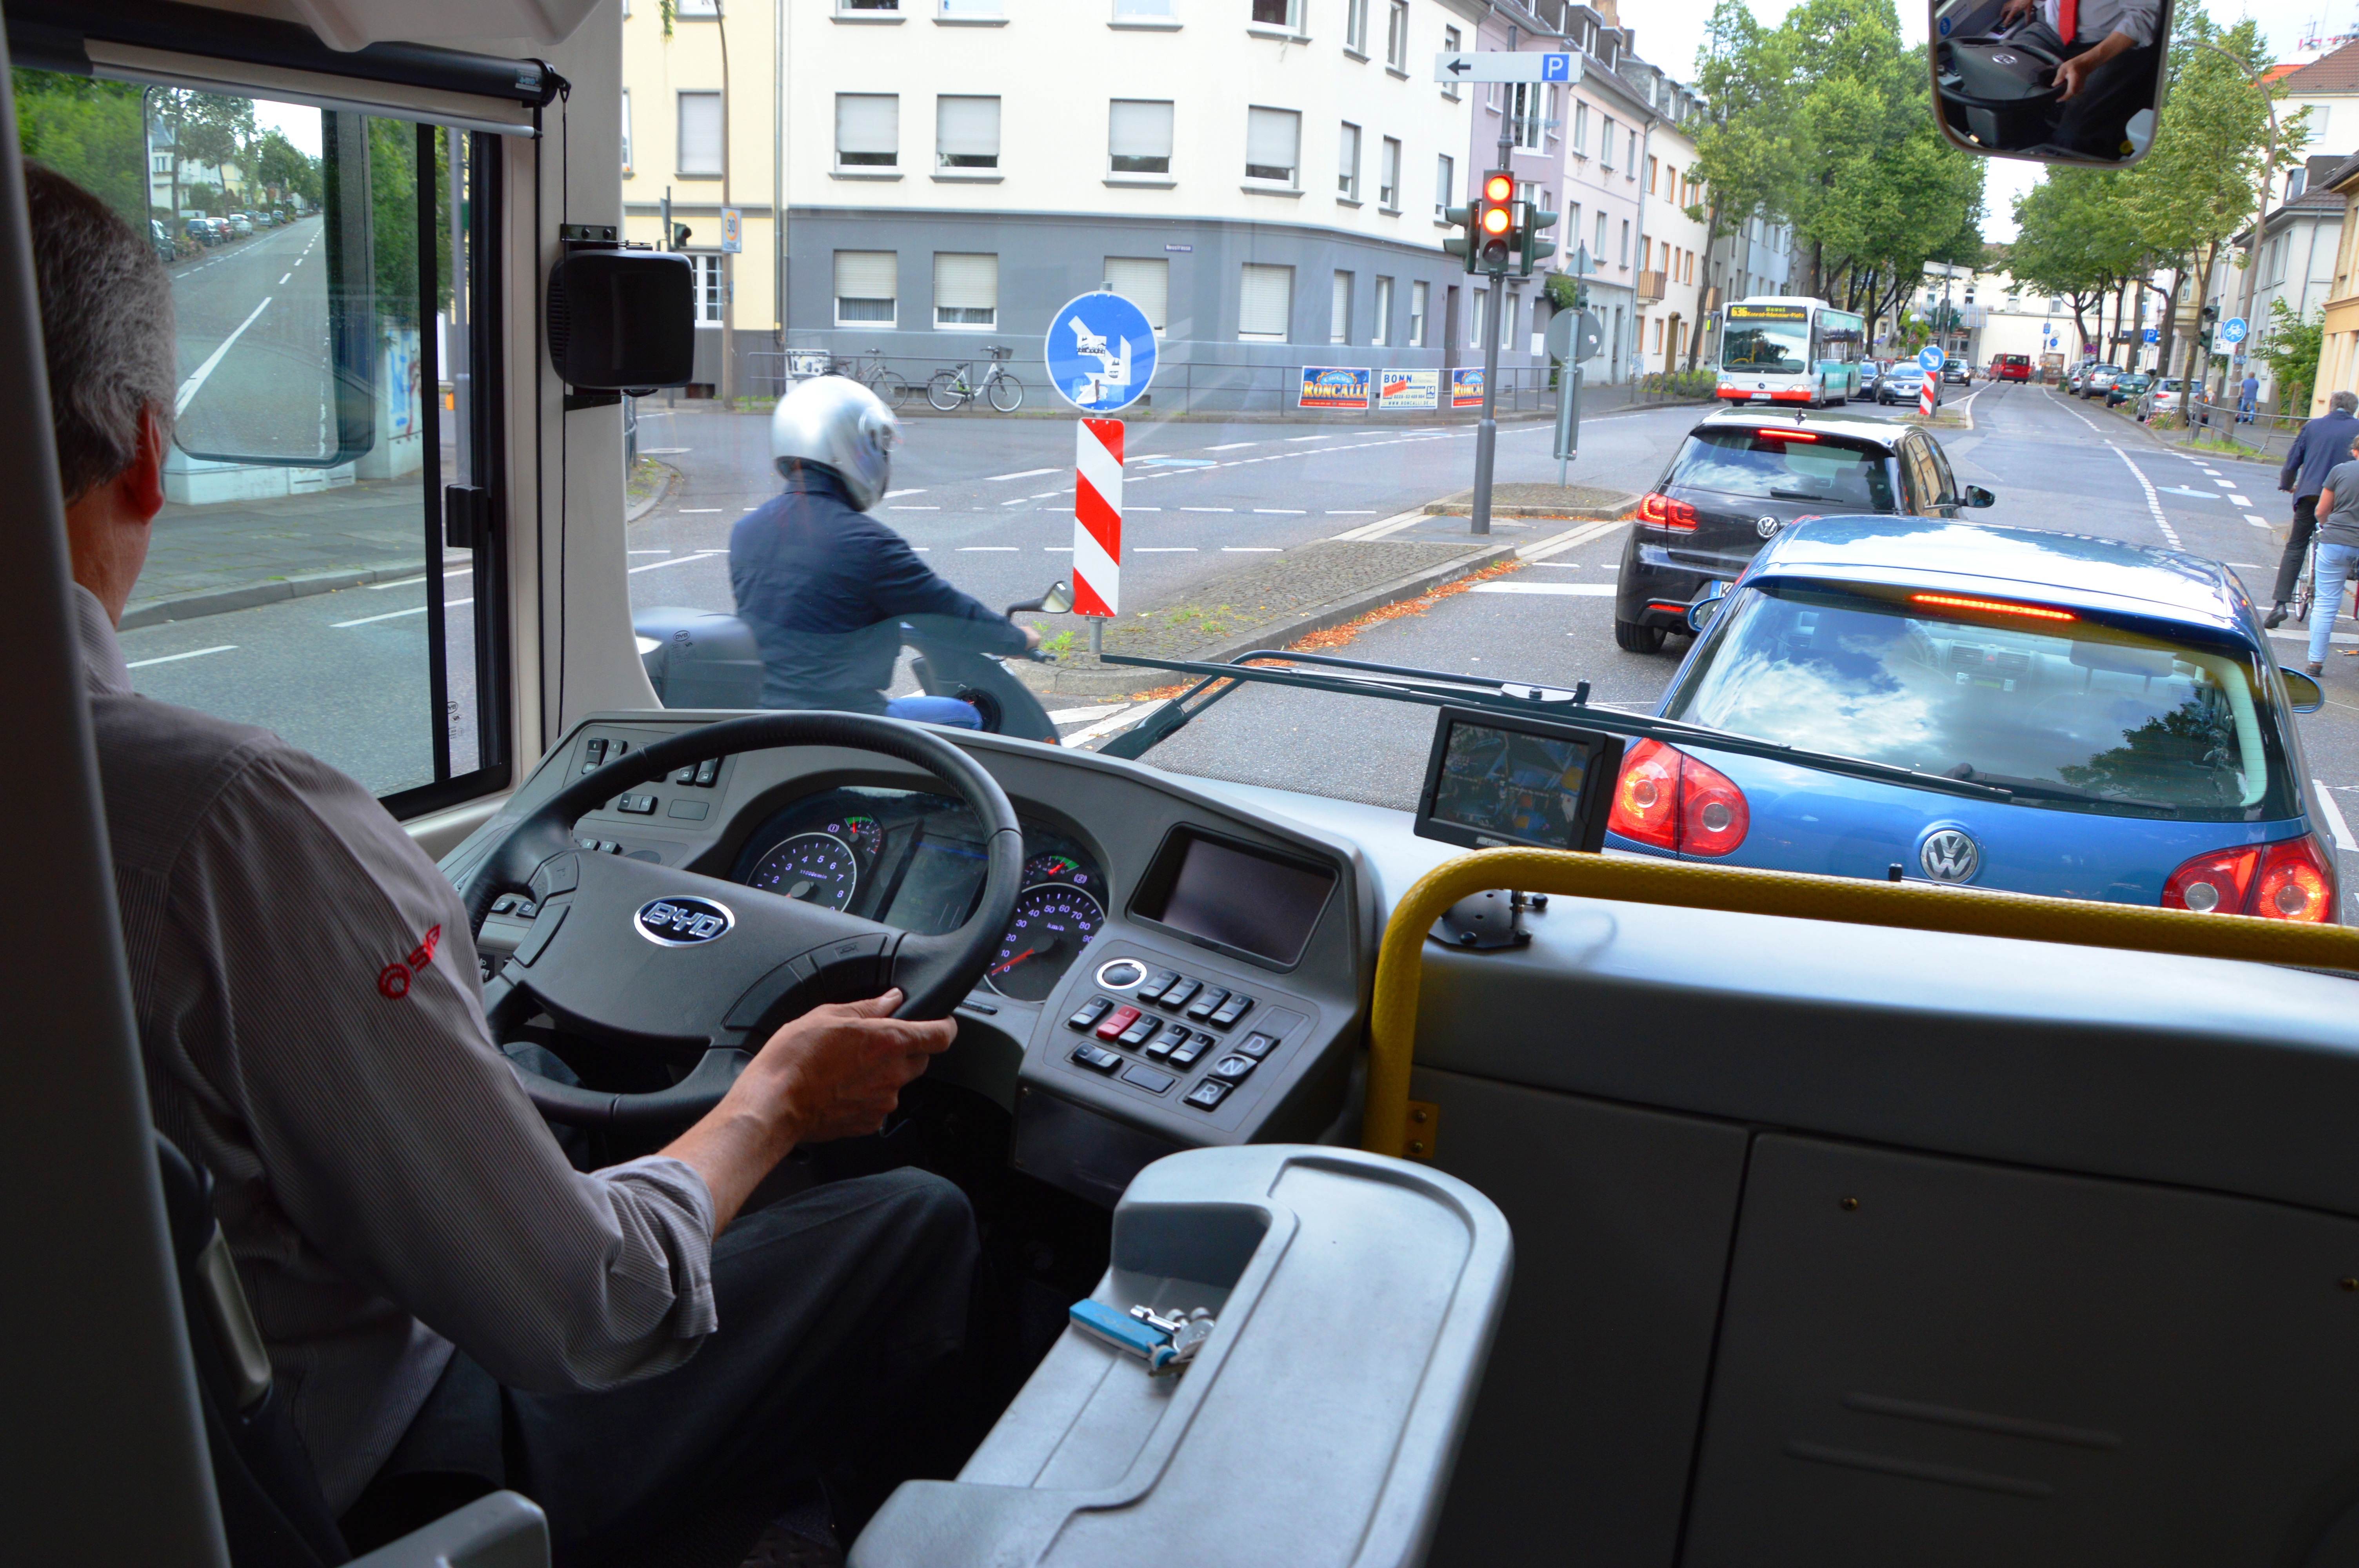 File:2013 in Bonn. BYD ebus (electrical bus). Bus interior. Driver ...